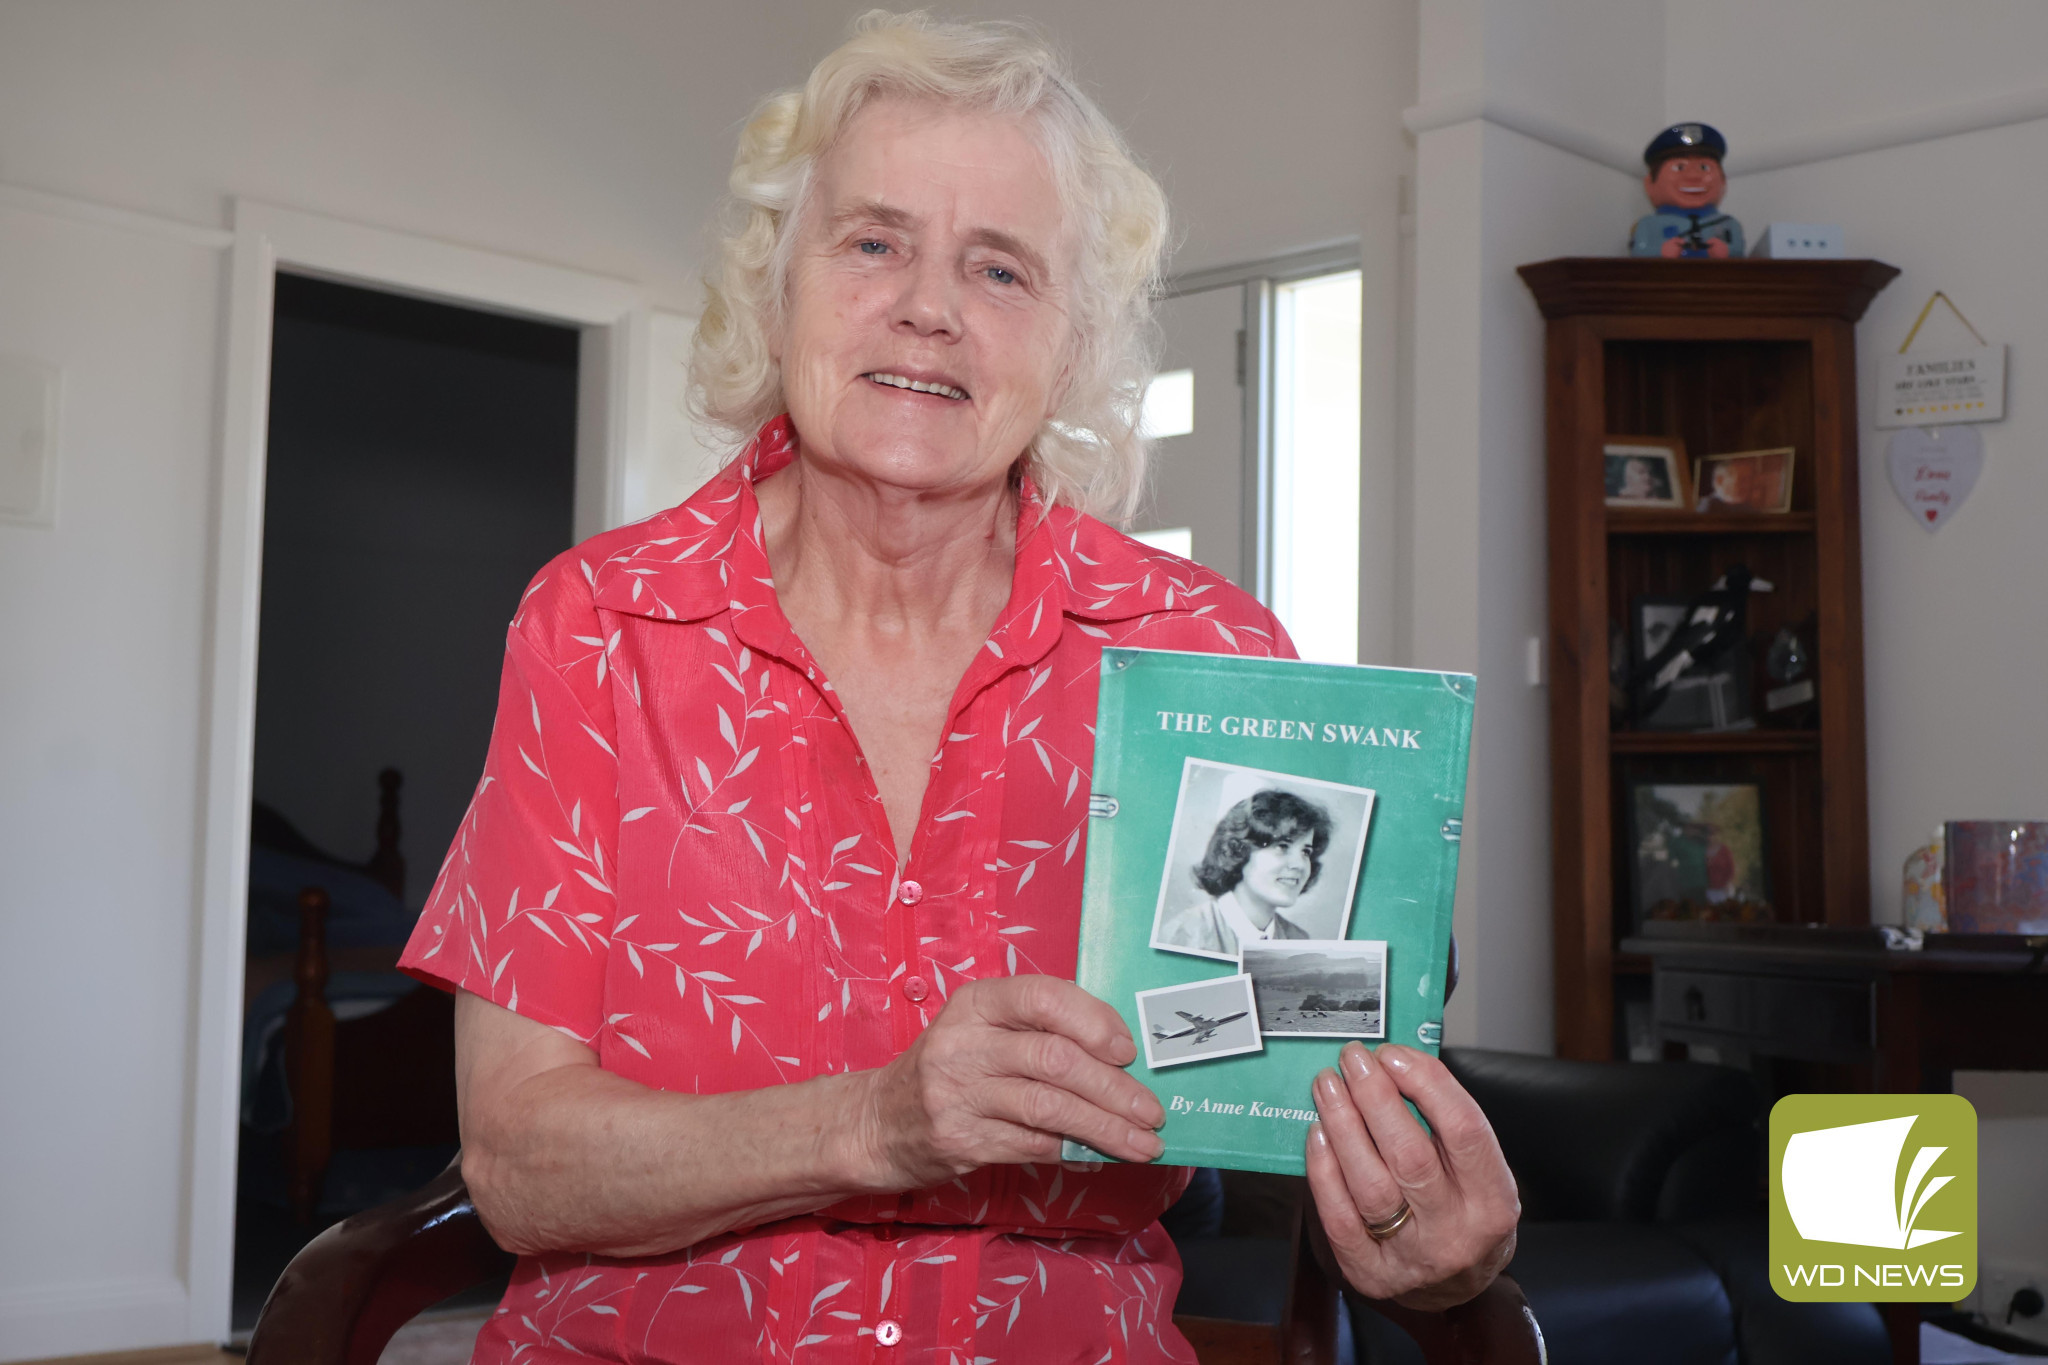 Through the years: Anne Kavenagh will launch her biography, ‘The Green Swank,’ this weekend in Terang.